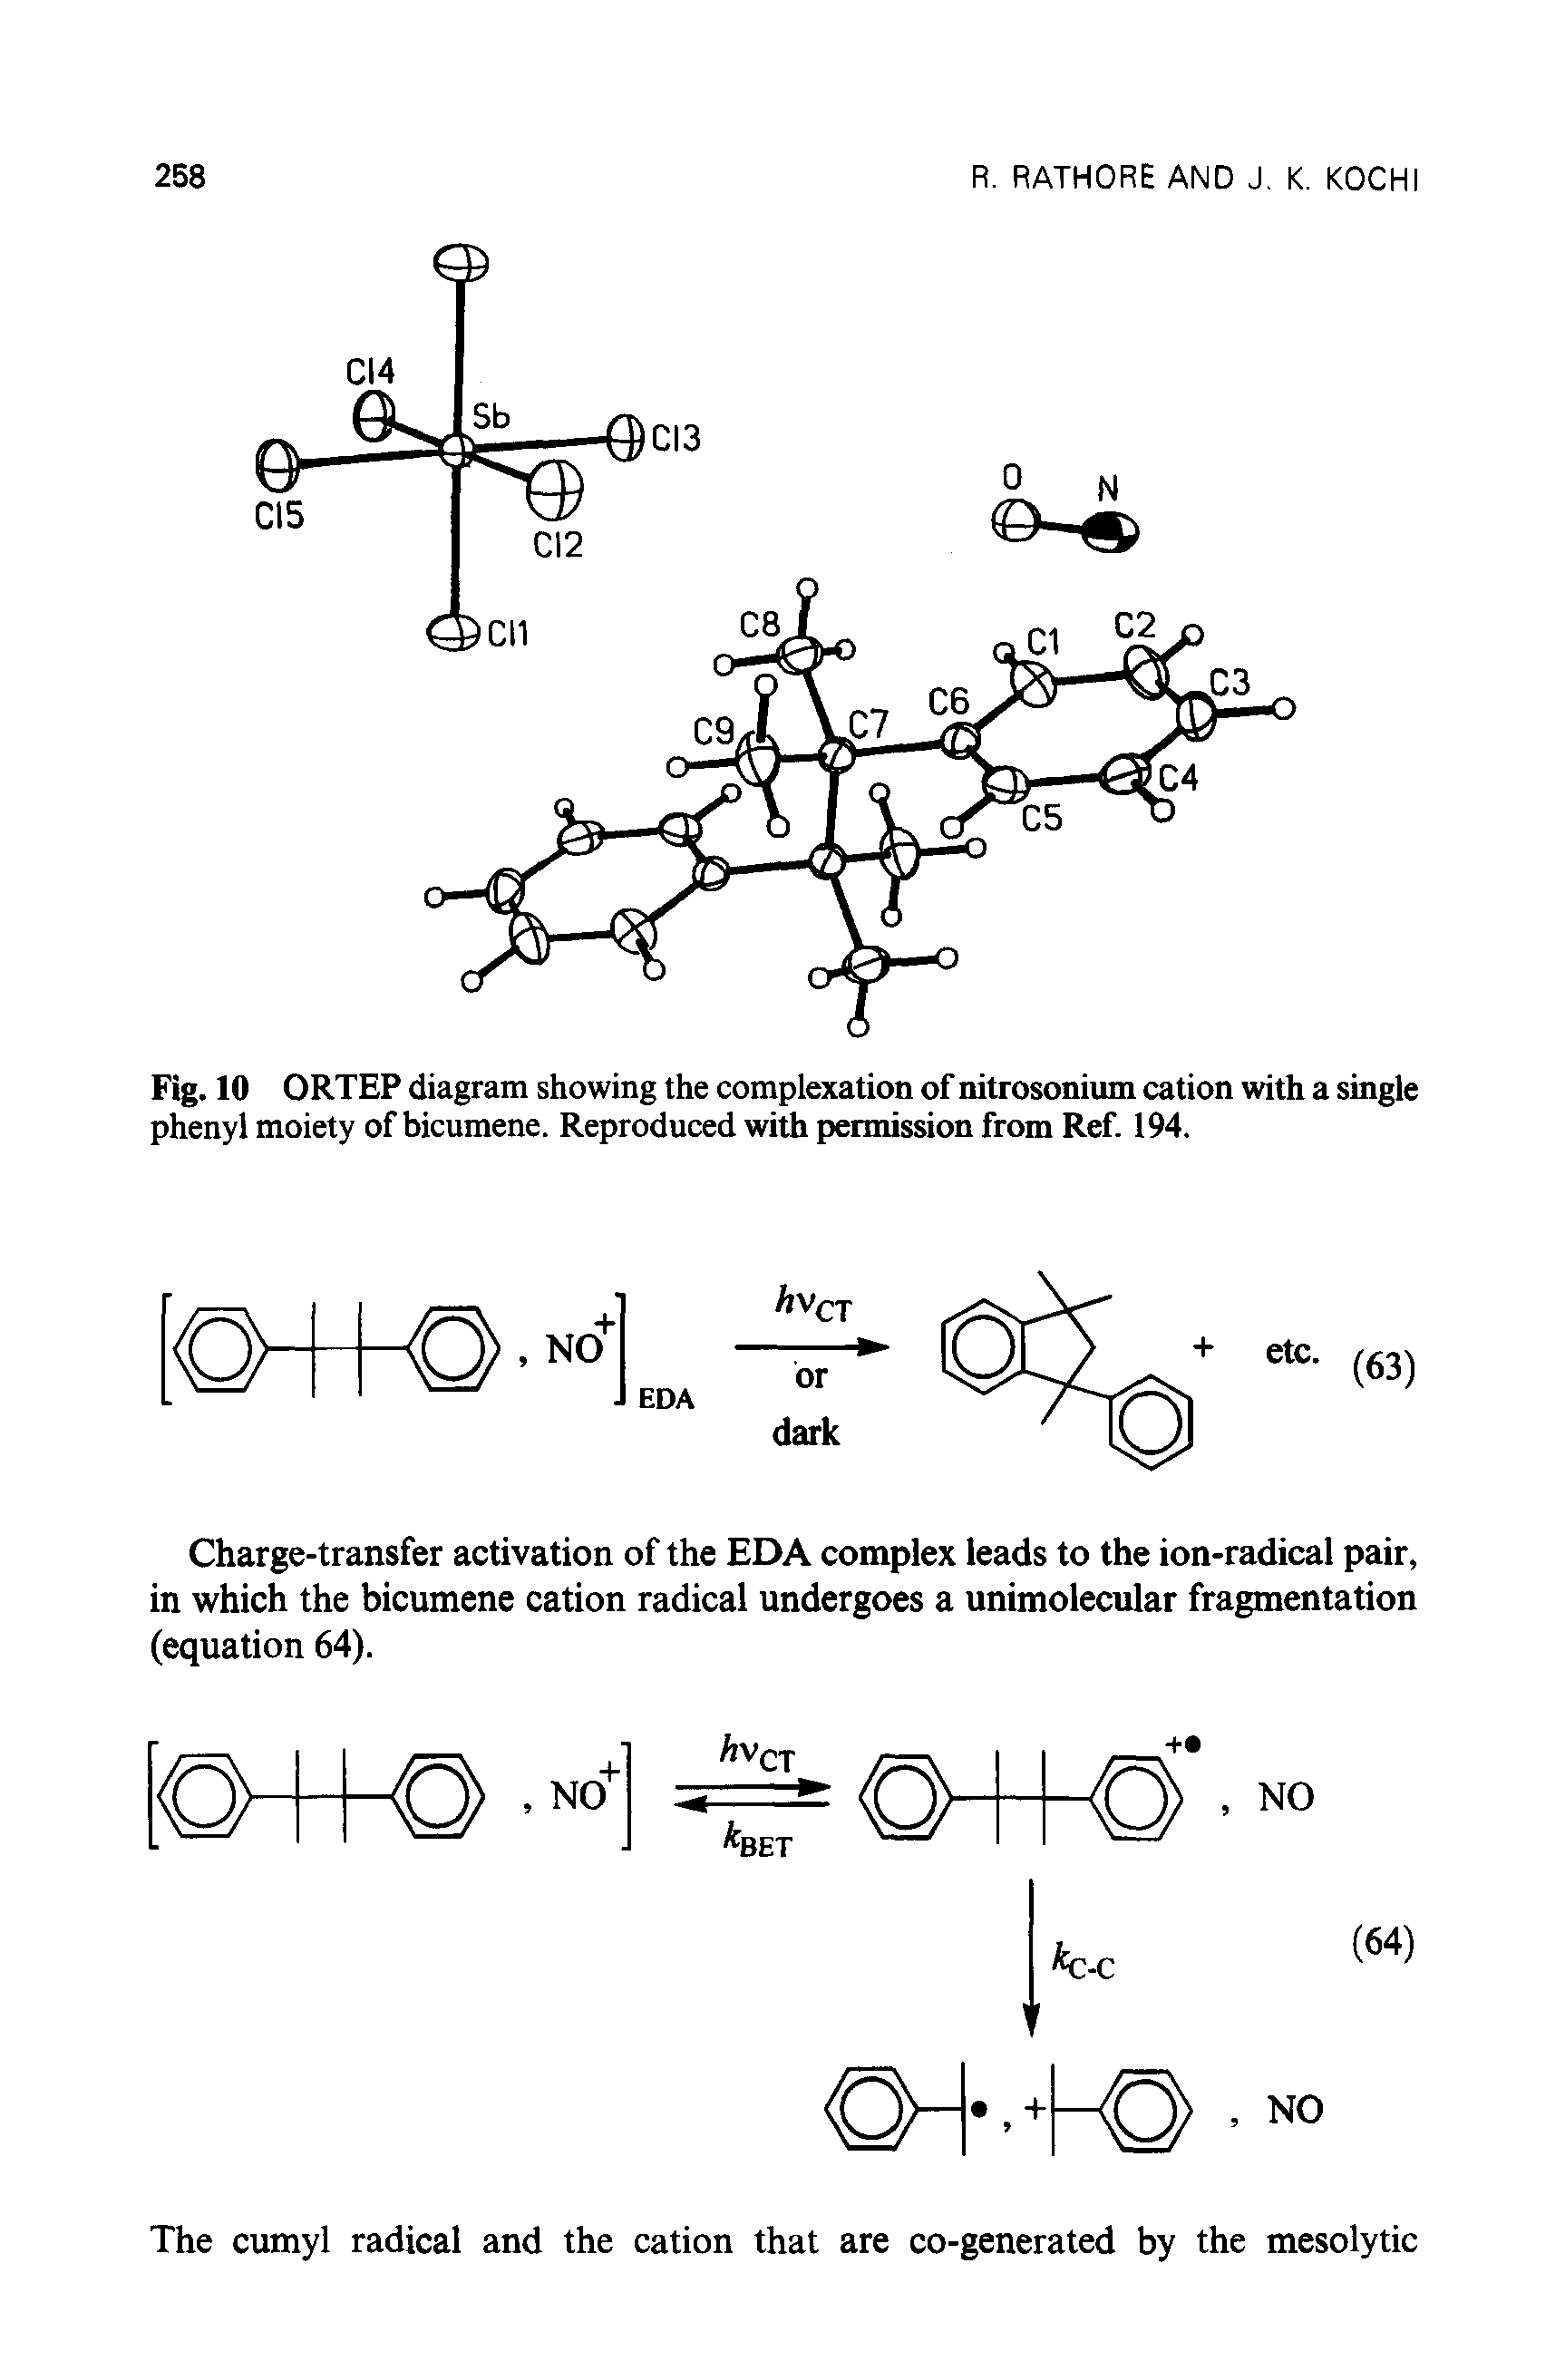 Fig. 10 ORTEP diagram showing the complexation of nitrosonium cation with a single phenyl moiety of bicumene. Reproduced with permission from Ref. 194.